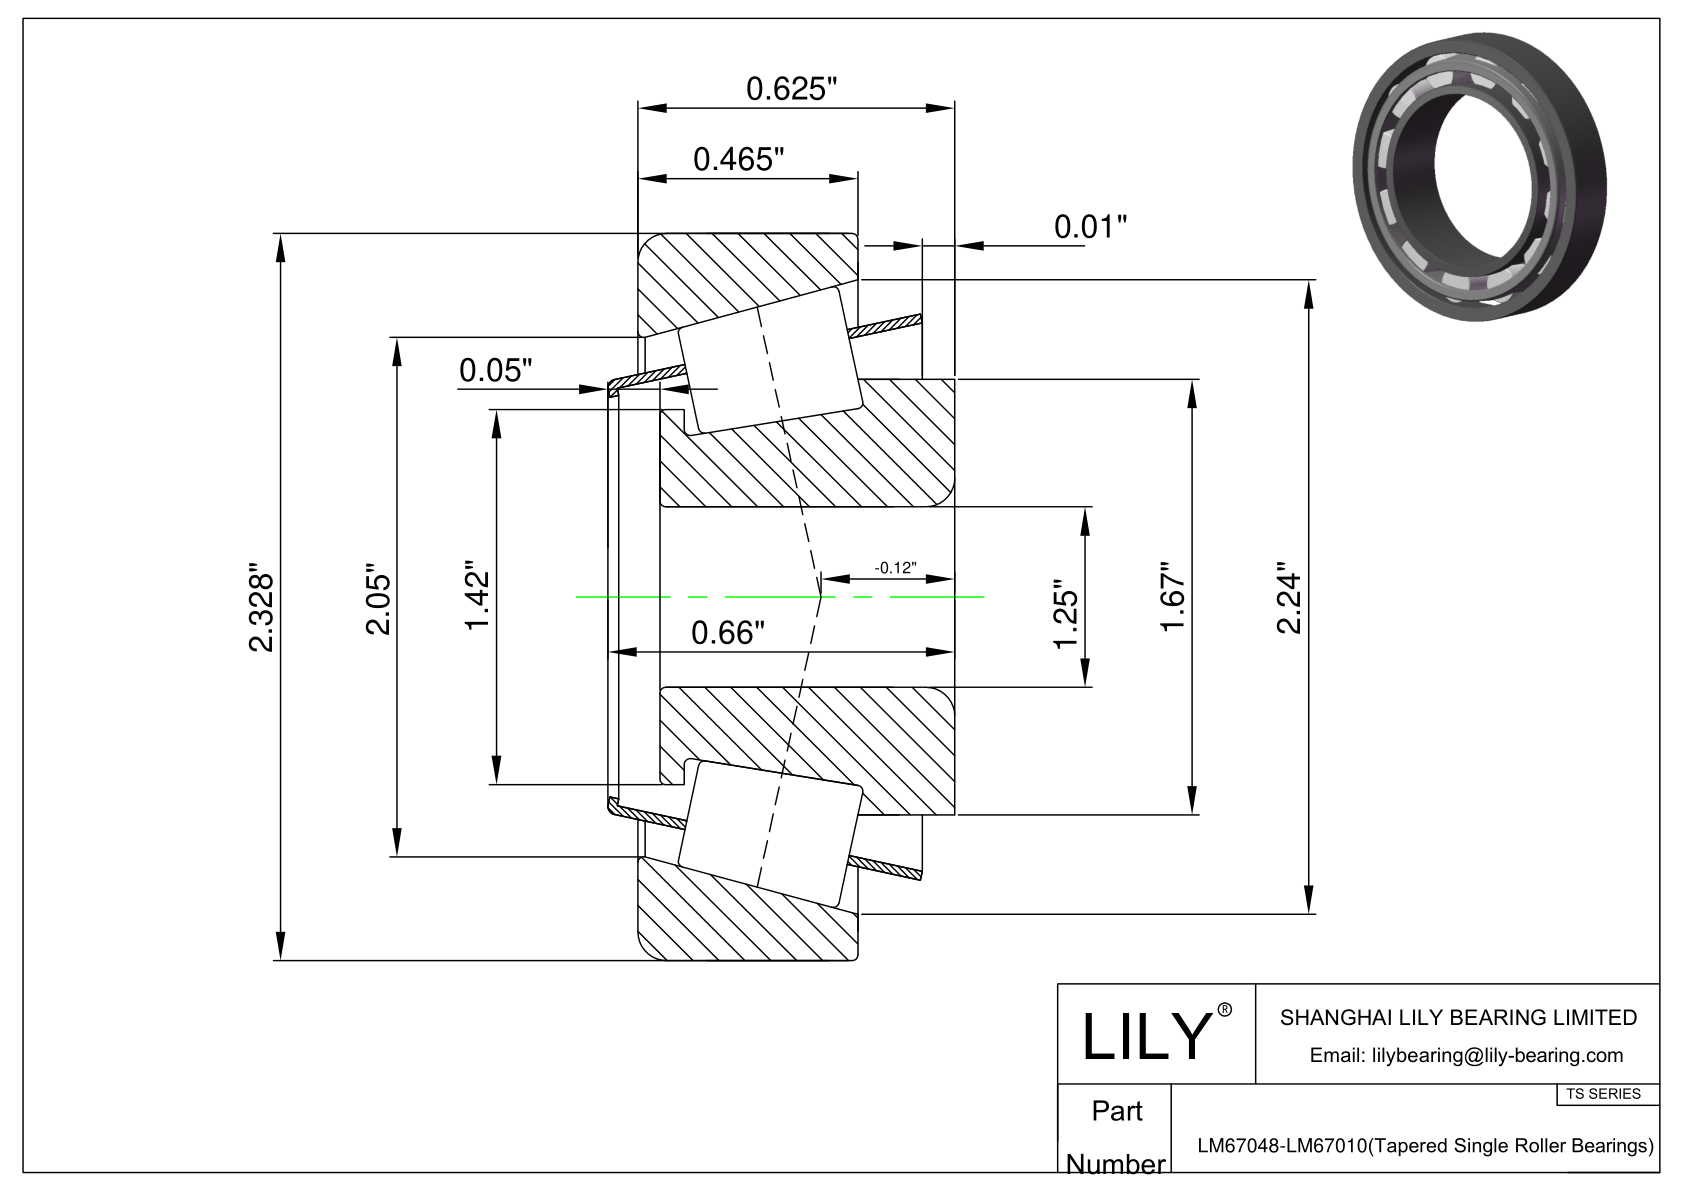 LM67048-LM67010 TS (Tapered Single Roller Bearings) (Imperial) cad drawing